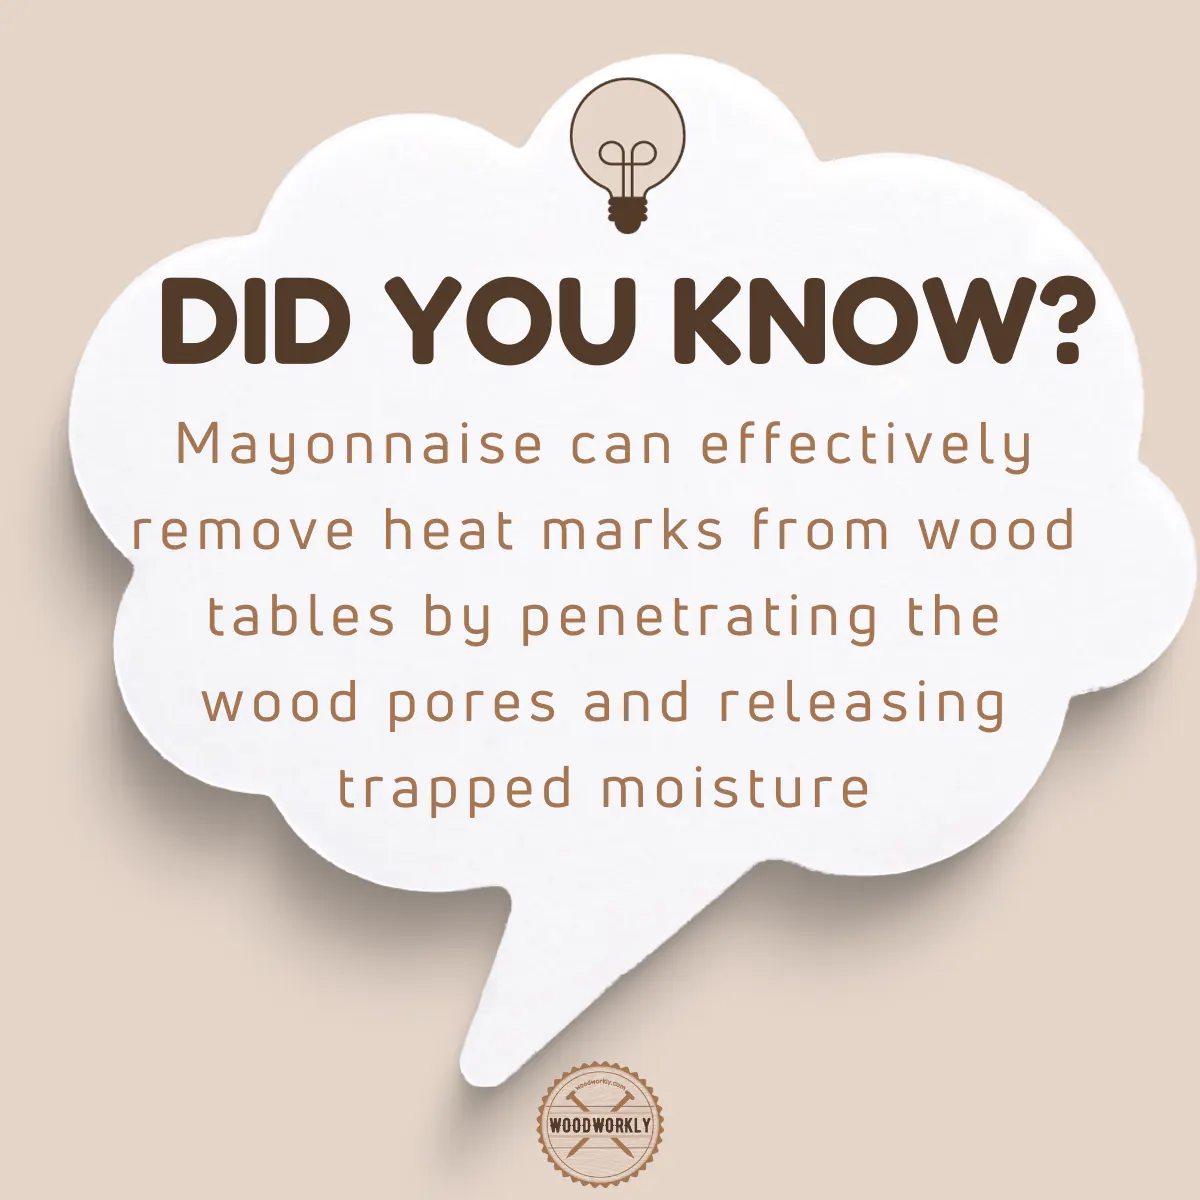 Did you know fact about removing heat marks off wood table